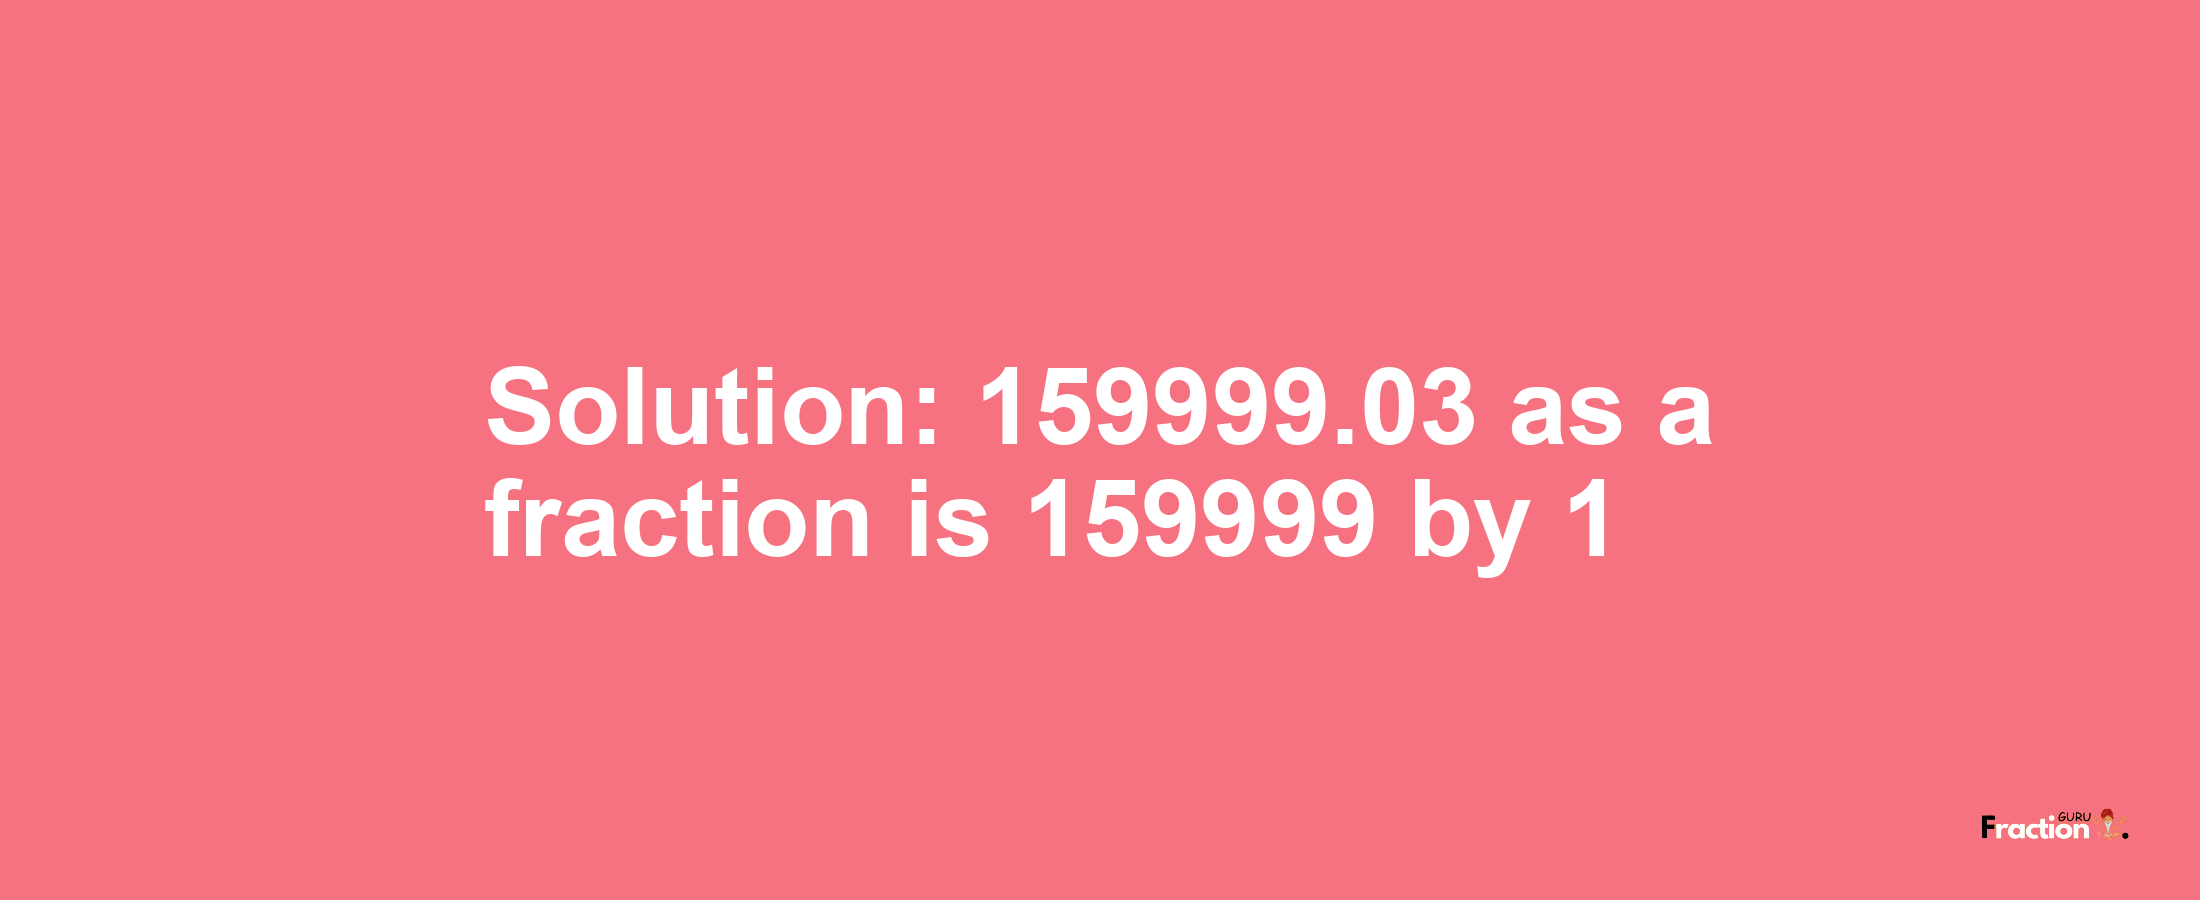 Solution:159999.03 as a fraction is 159999/1